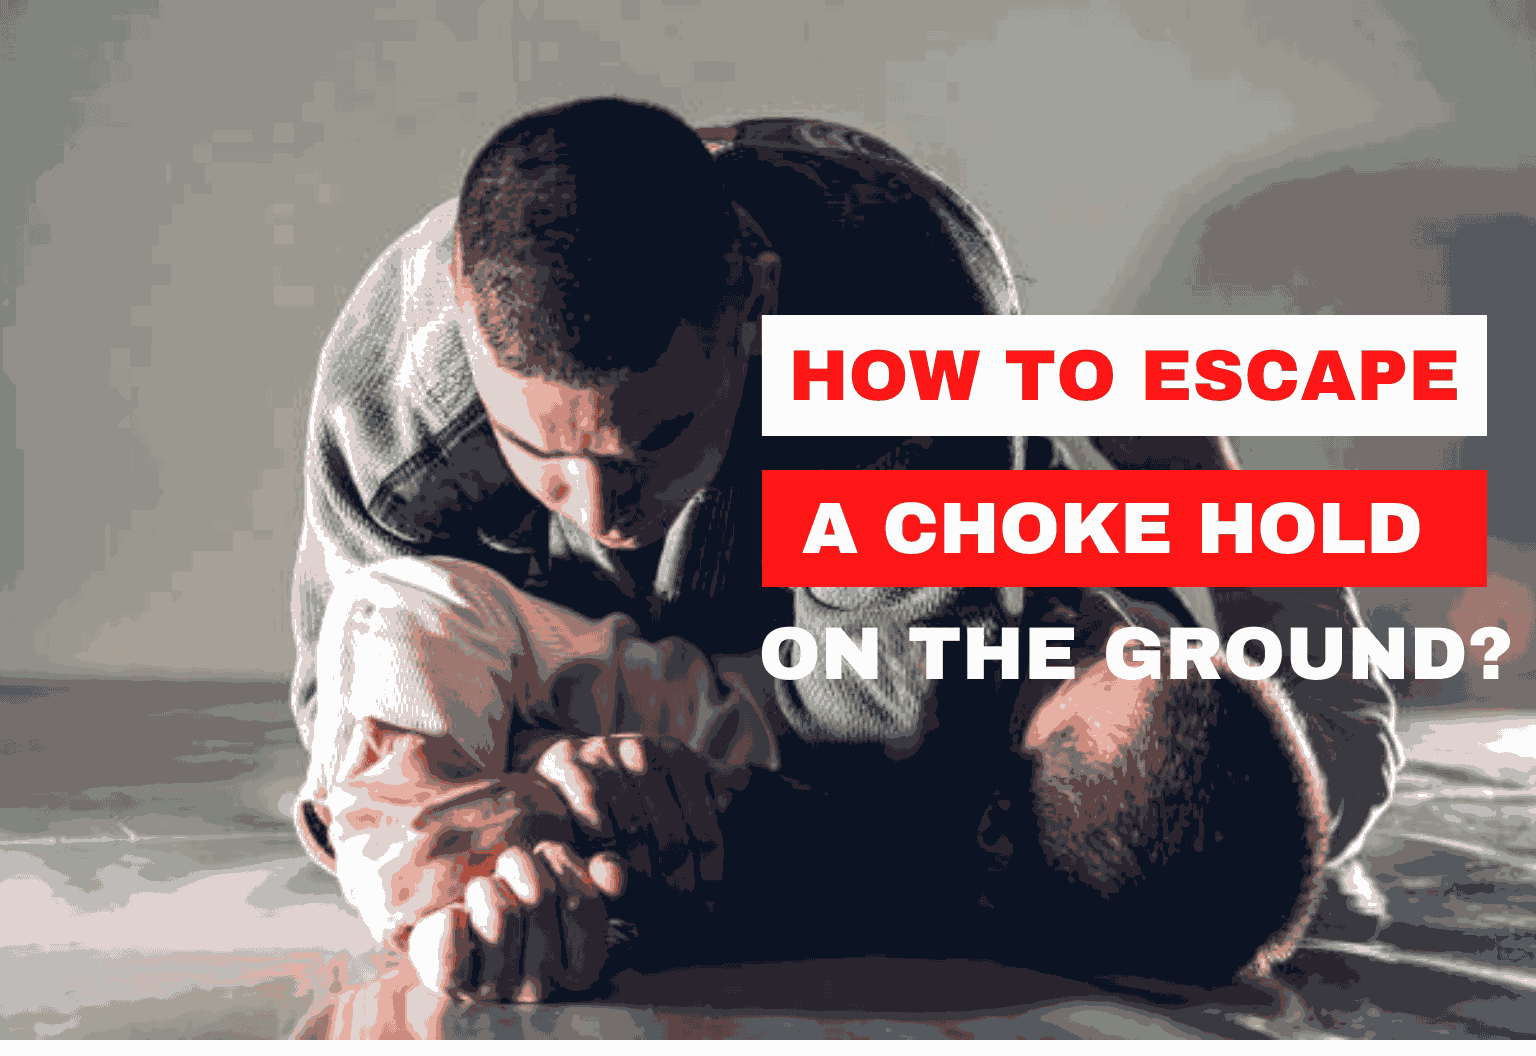 How to Escape a Choke Hold on the Ground?